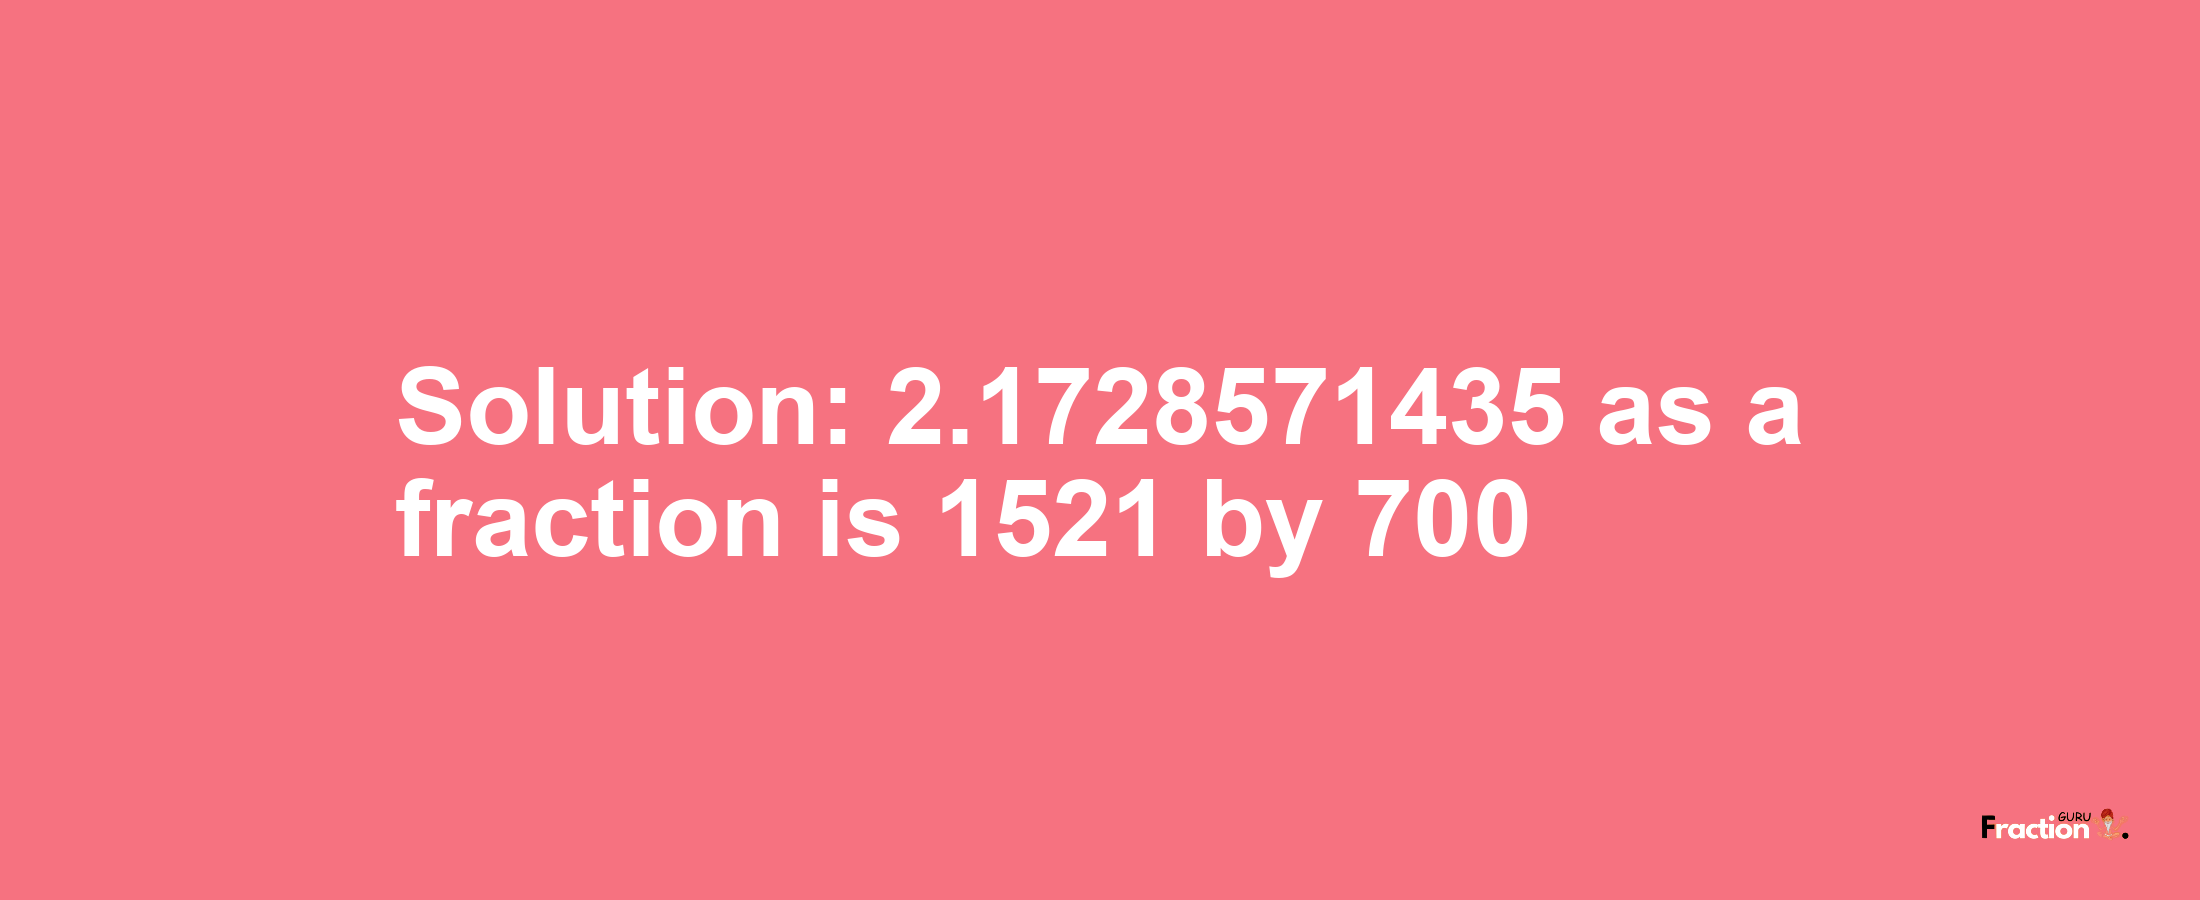 Solution:2.1728571435 as a fraction is 1521/700